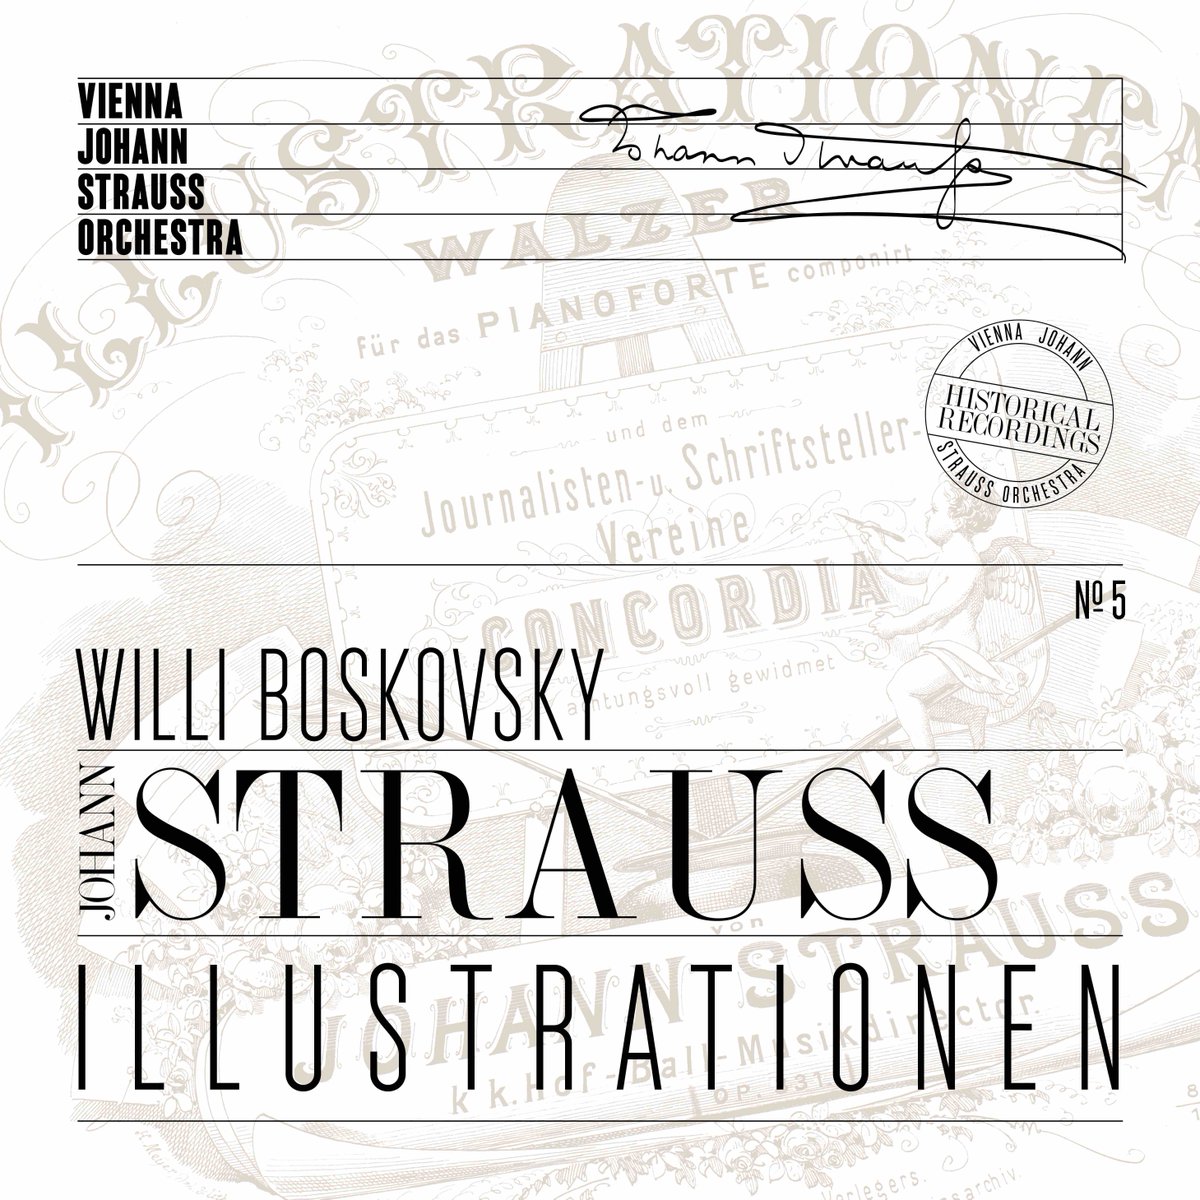 🎶 Strauss recording of the day 🎶
WJSO-005|09 – J. Strauss II: The Timeless One/Polka française op. 302
▶️ Spotify: ow.ly/JHbt50DvCGf
▶️ Apple Music: ow.ly/cLG850DvCGe
▶️ YouTube: ow.ly/wFVw50DvCGi
📀 Info: ow.ly/B0qZ50DvCGk
©ow.ly/F7Ie50DvCGj #WJSO